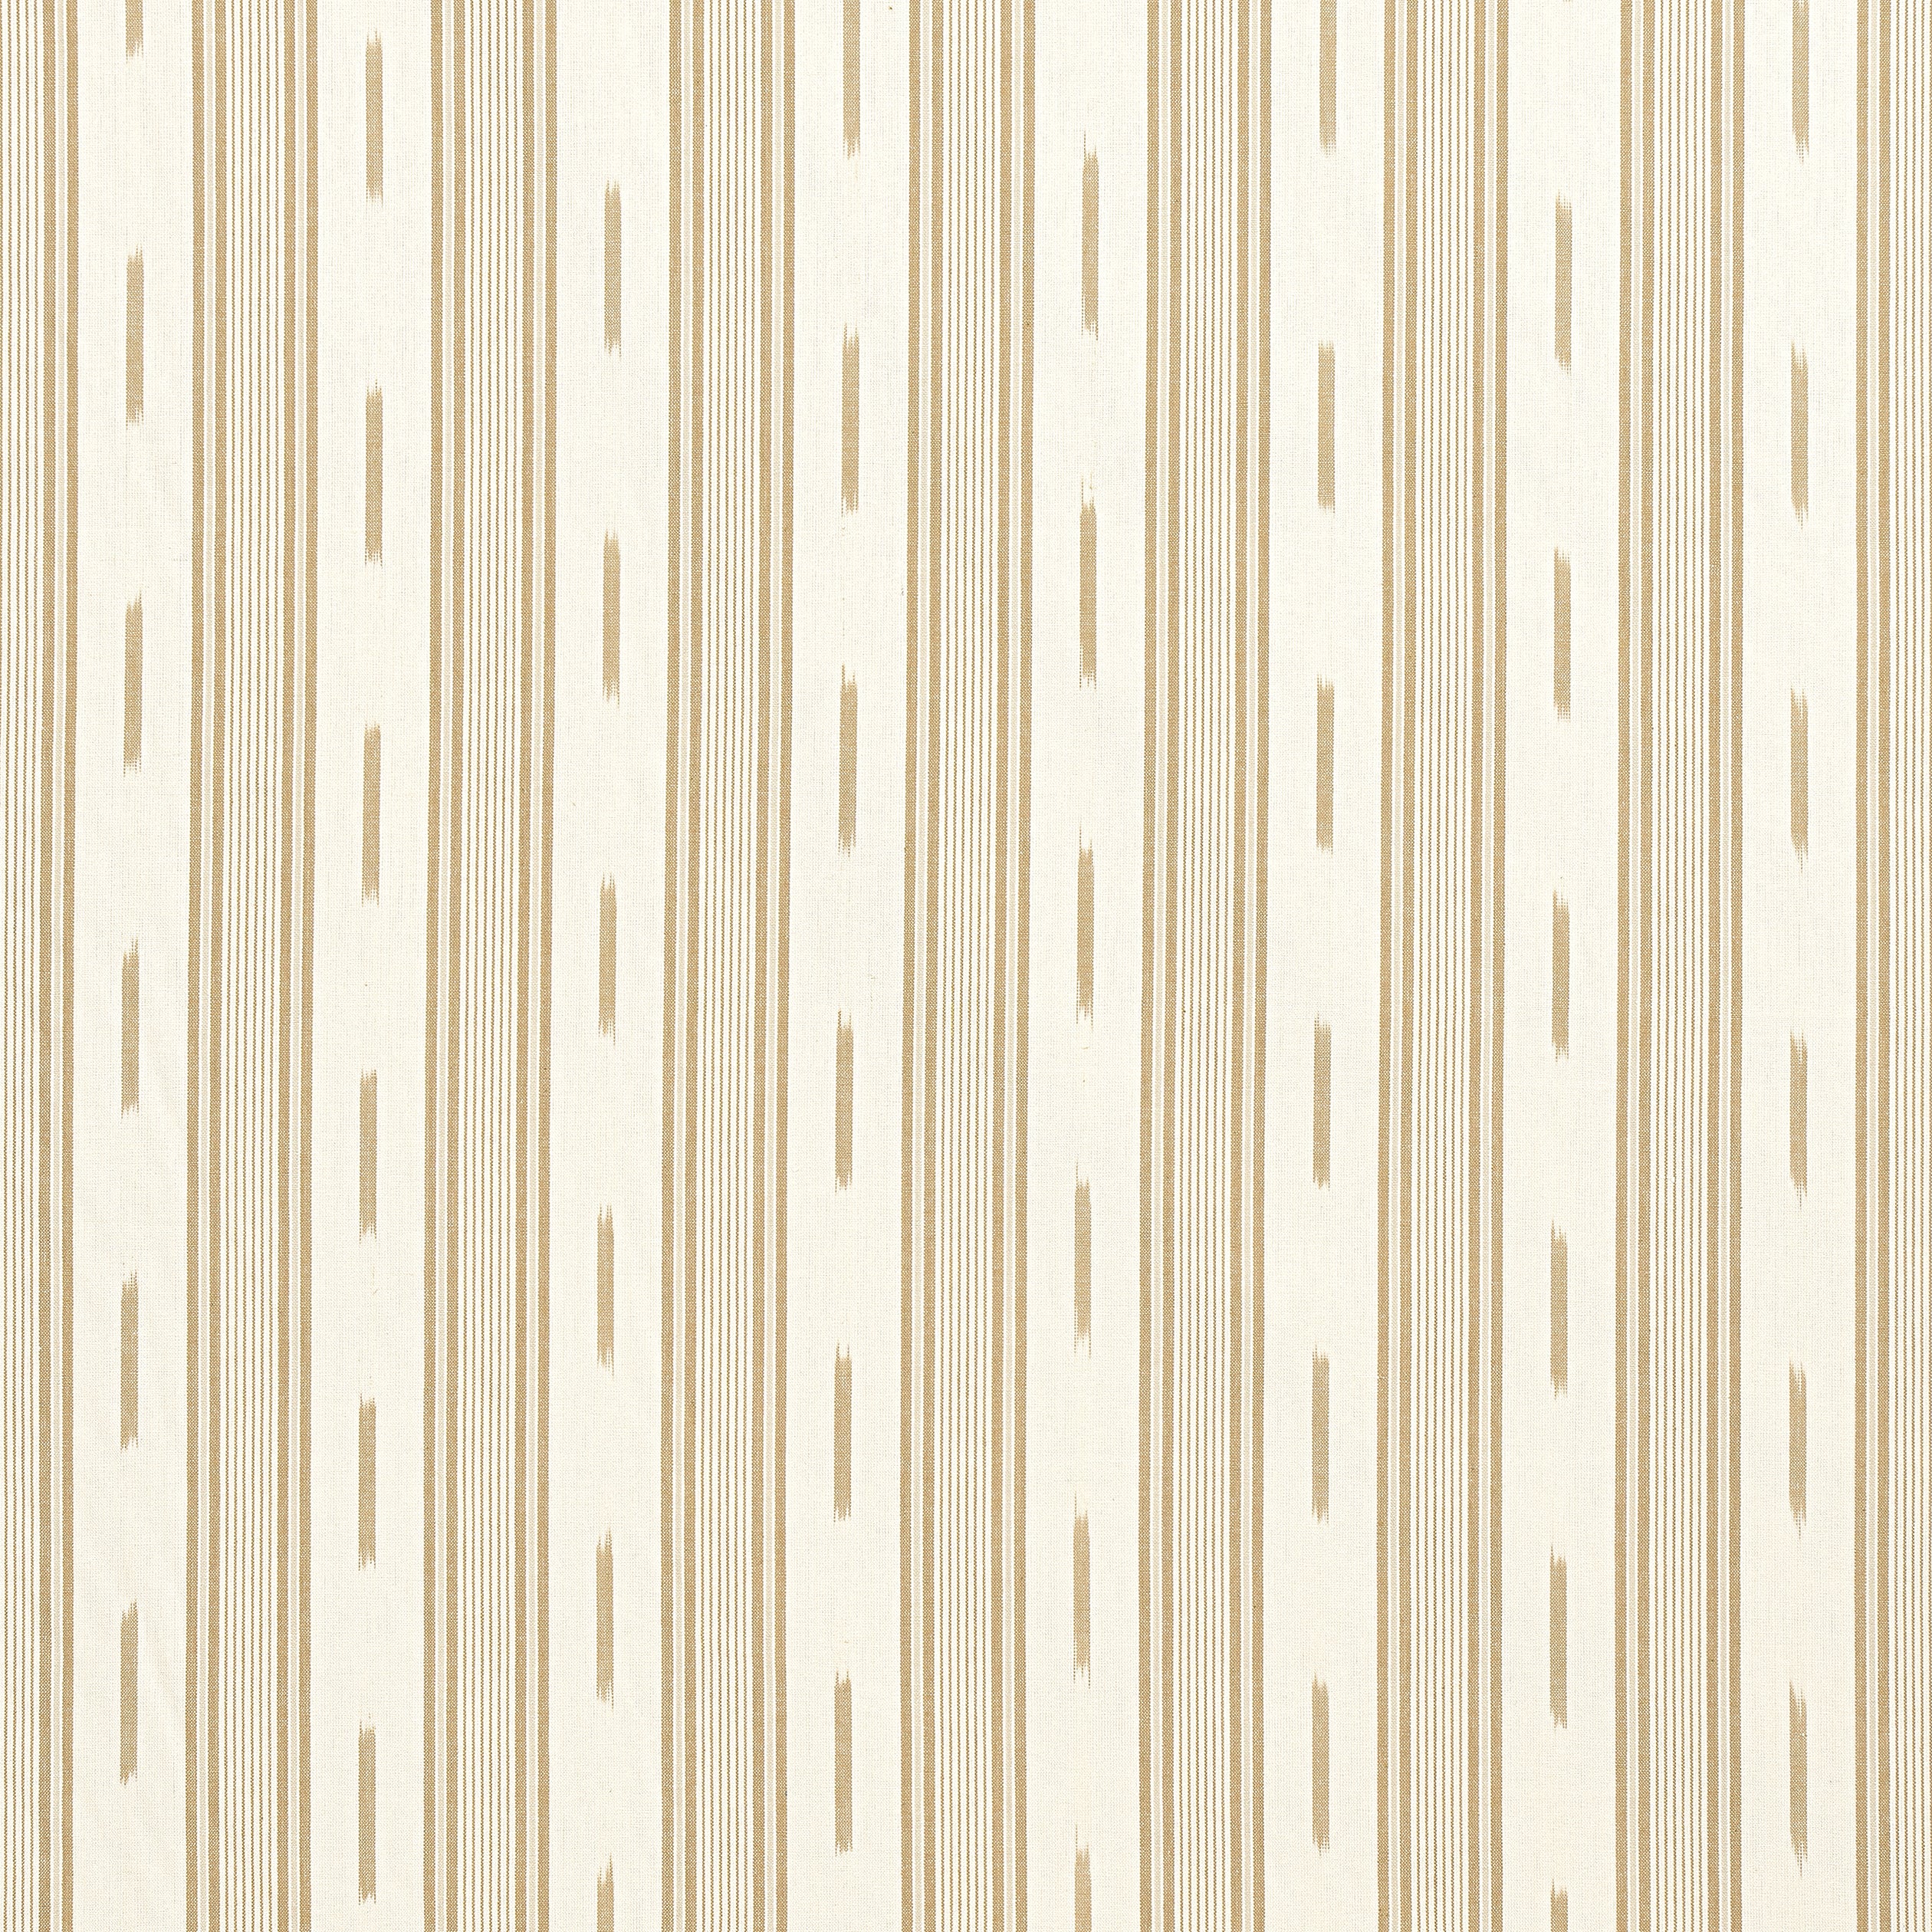 Odeshia Stripe fabric in camel color - pattern number W781306 - by Thibaut in the Montecito collection